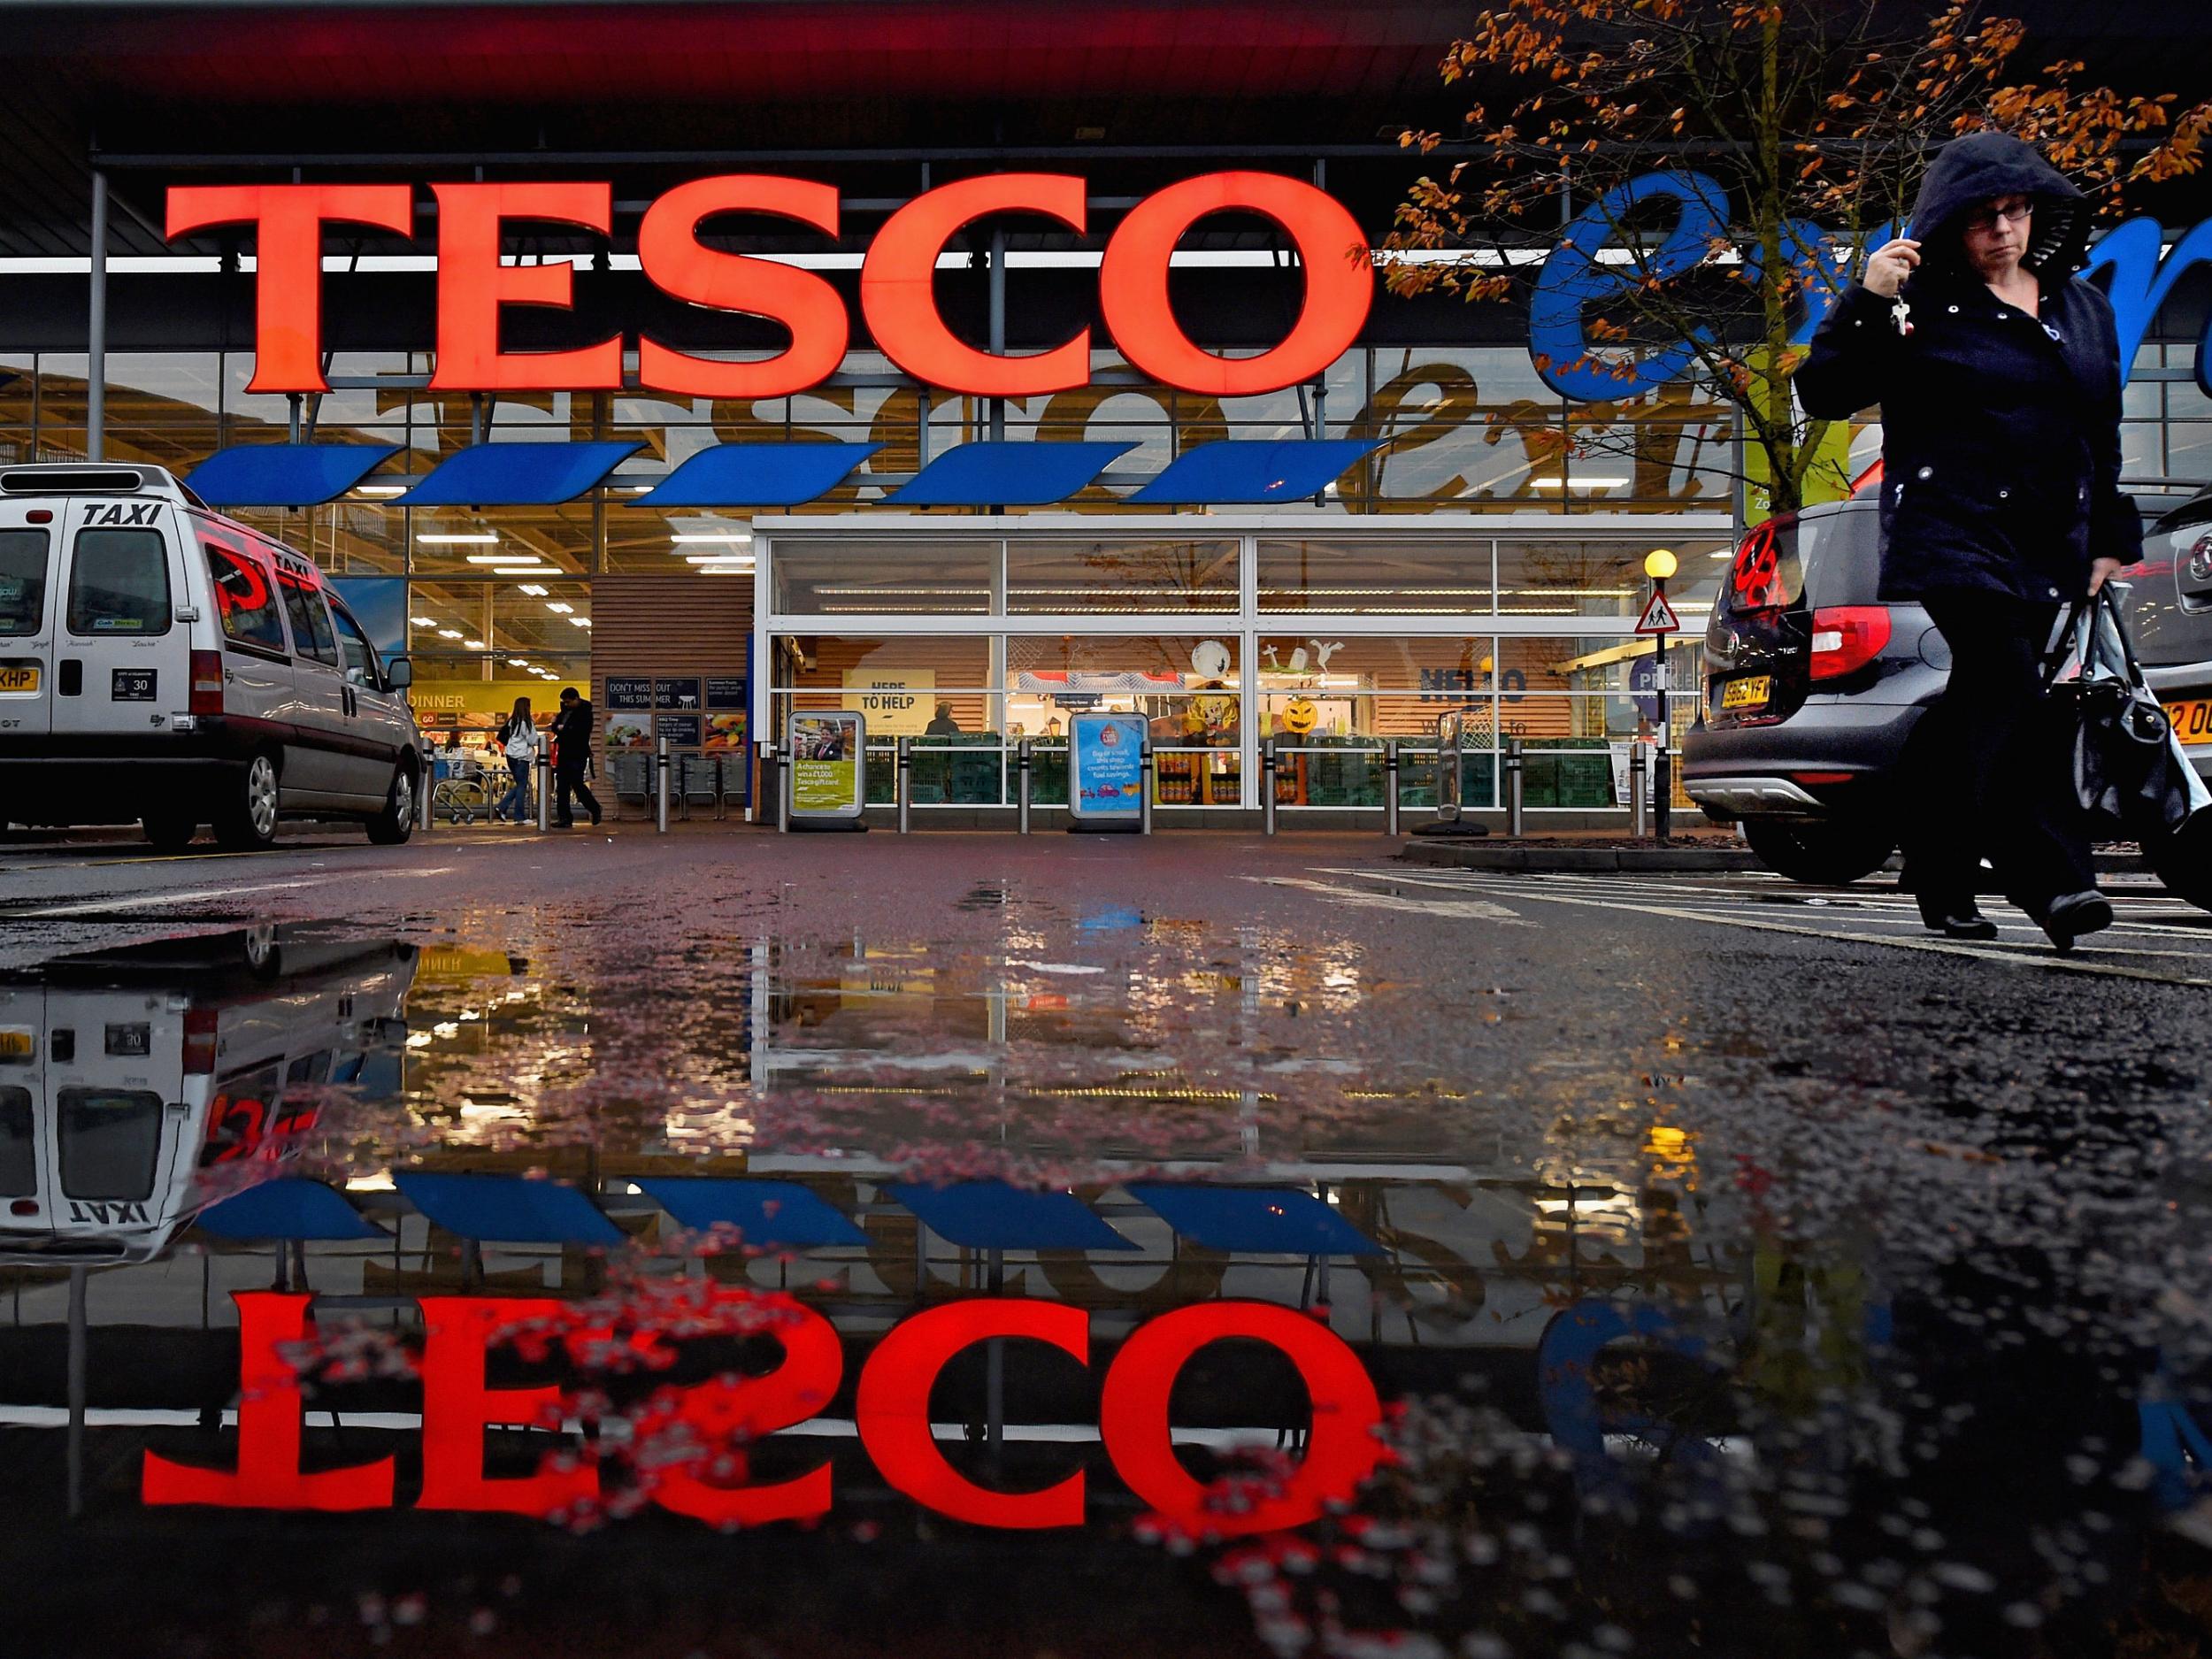 Tesco has already revealed plans to lose or cut the hours of one in six staff